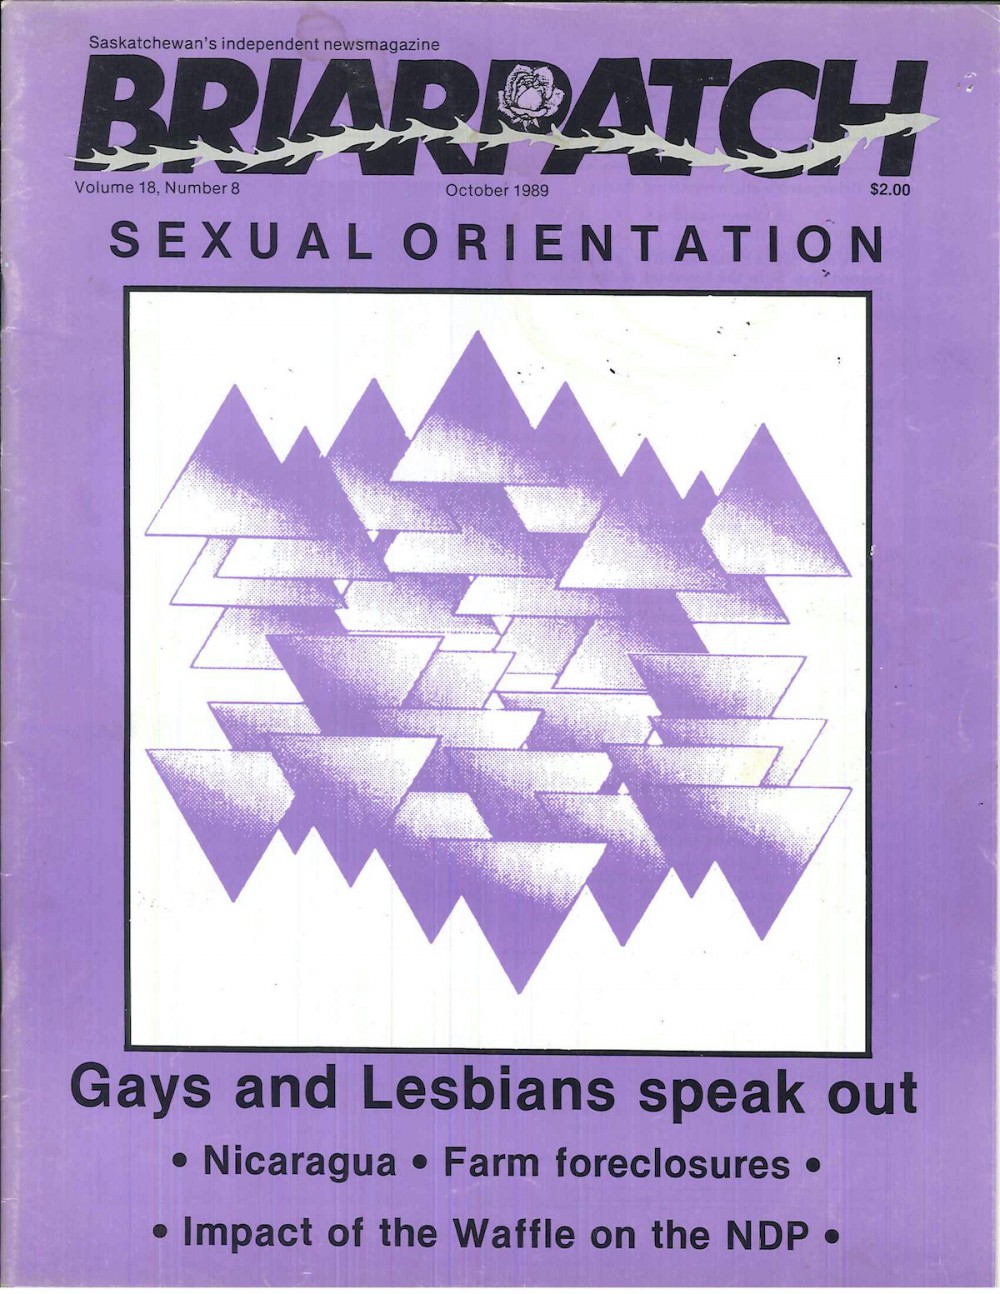 A scan of the cover of the October 1989 issue of Briarpatch. Around an illustration of many purple triangles overlapping, the words